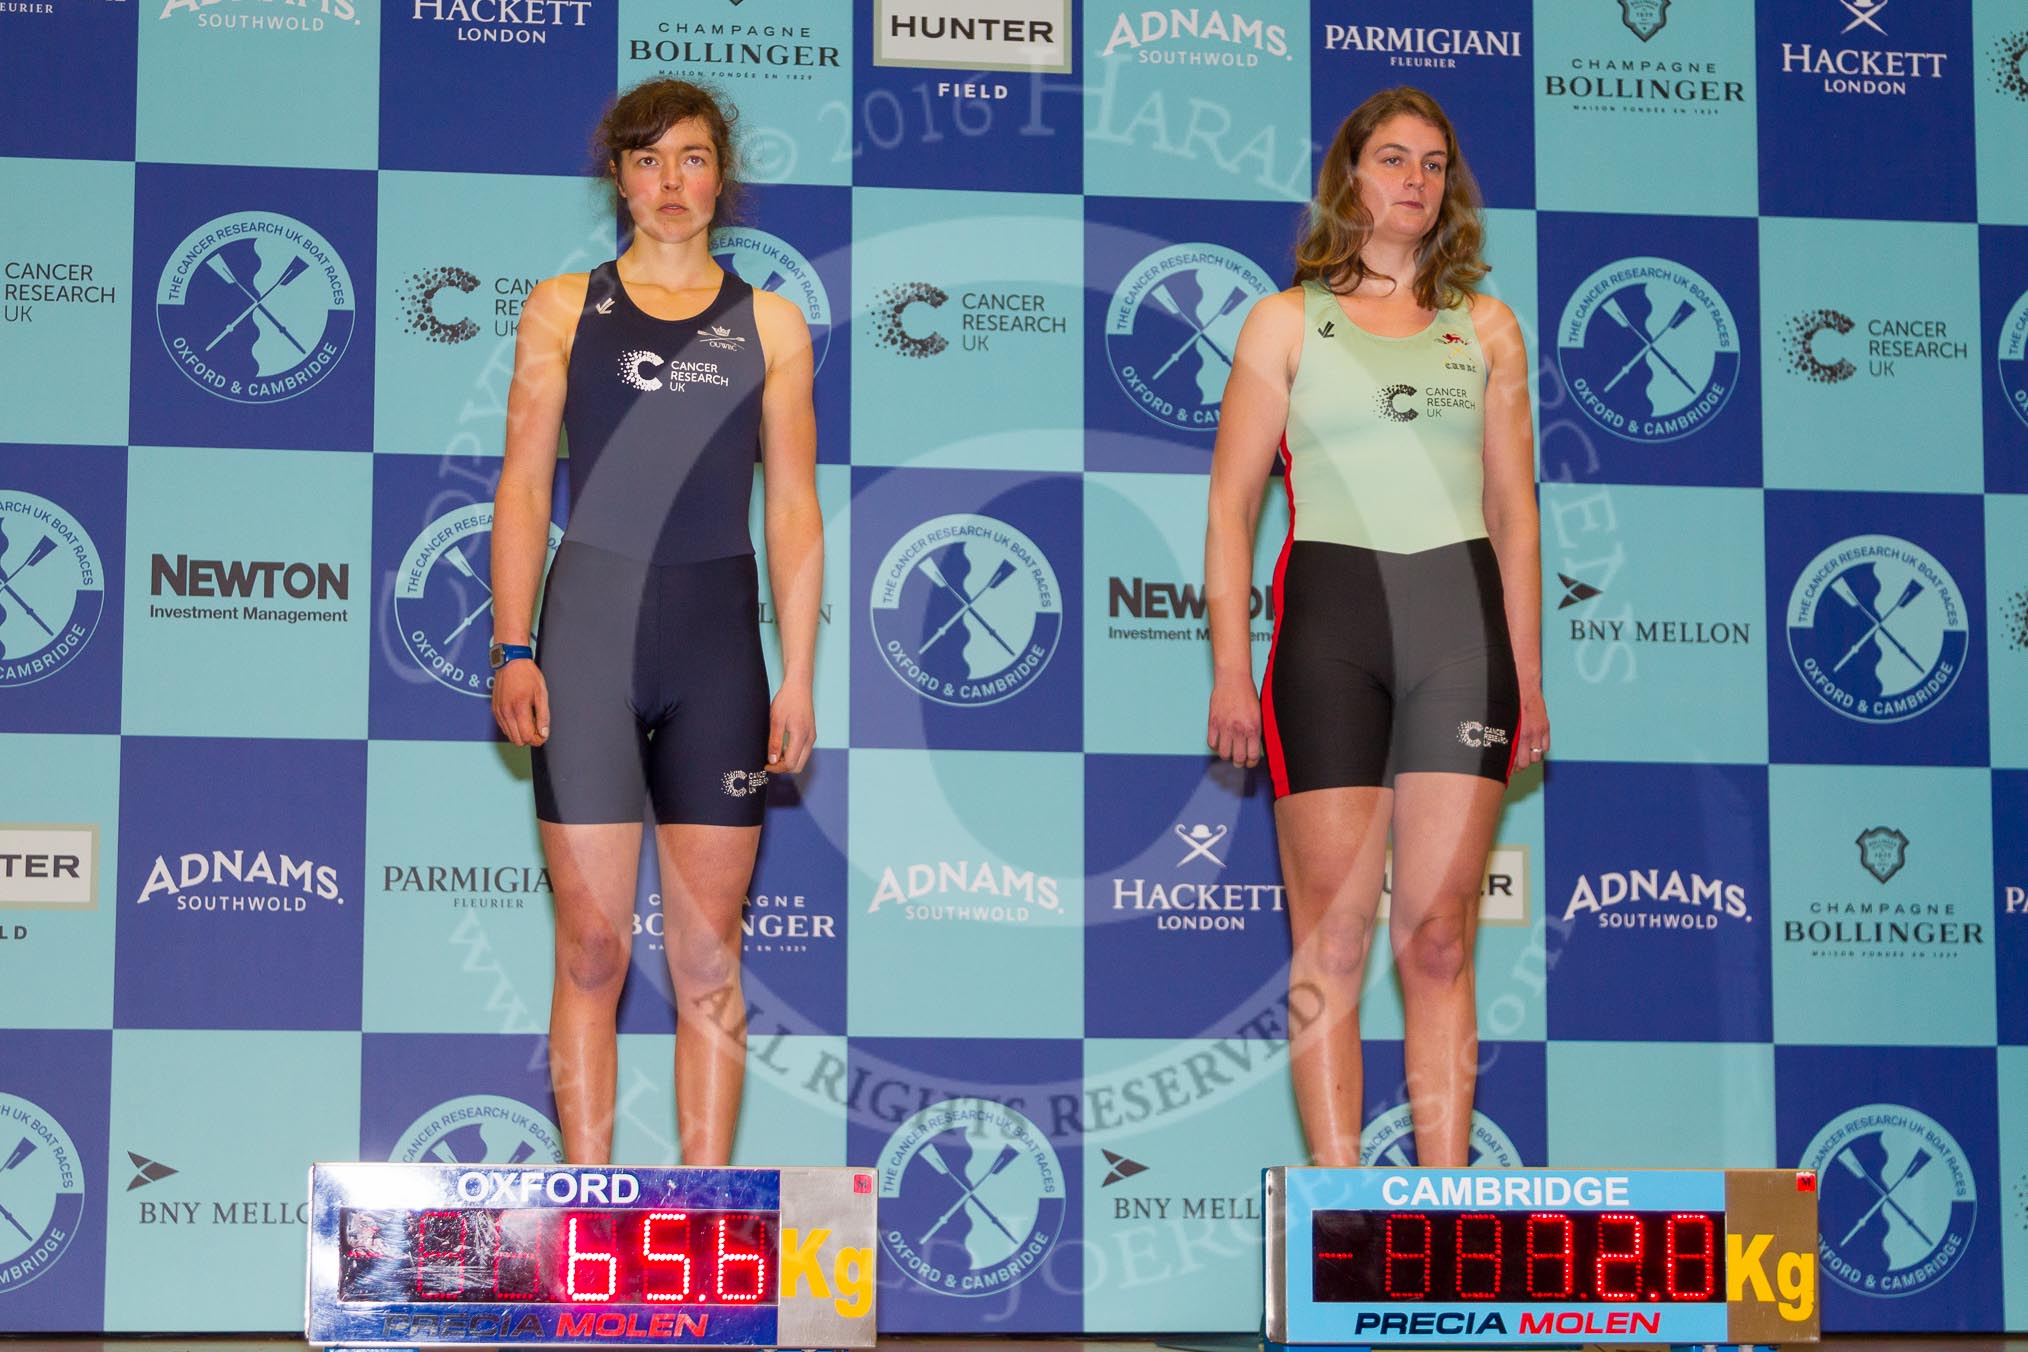 The Boat Race season 2016 - Crew Announcement and Weigh-In: The Women's Boat Race, stroke: Oxford: Lauren Kedar – 65.6kg, Cambridge: Myriam Goudet – 80.4kg.
Westmister Hall, Westminster,
London SW11,

United Kingdom,
on 01 March 2016 at 10:14, image #43